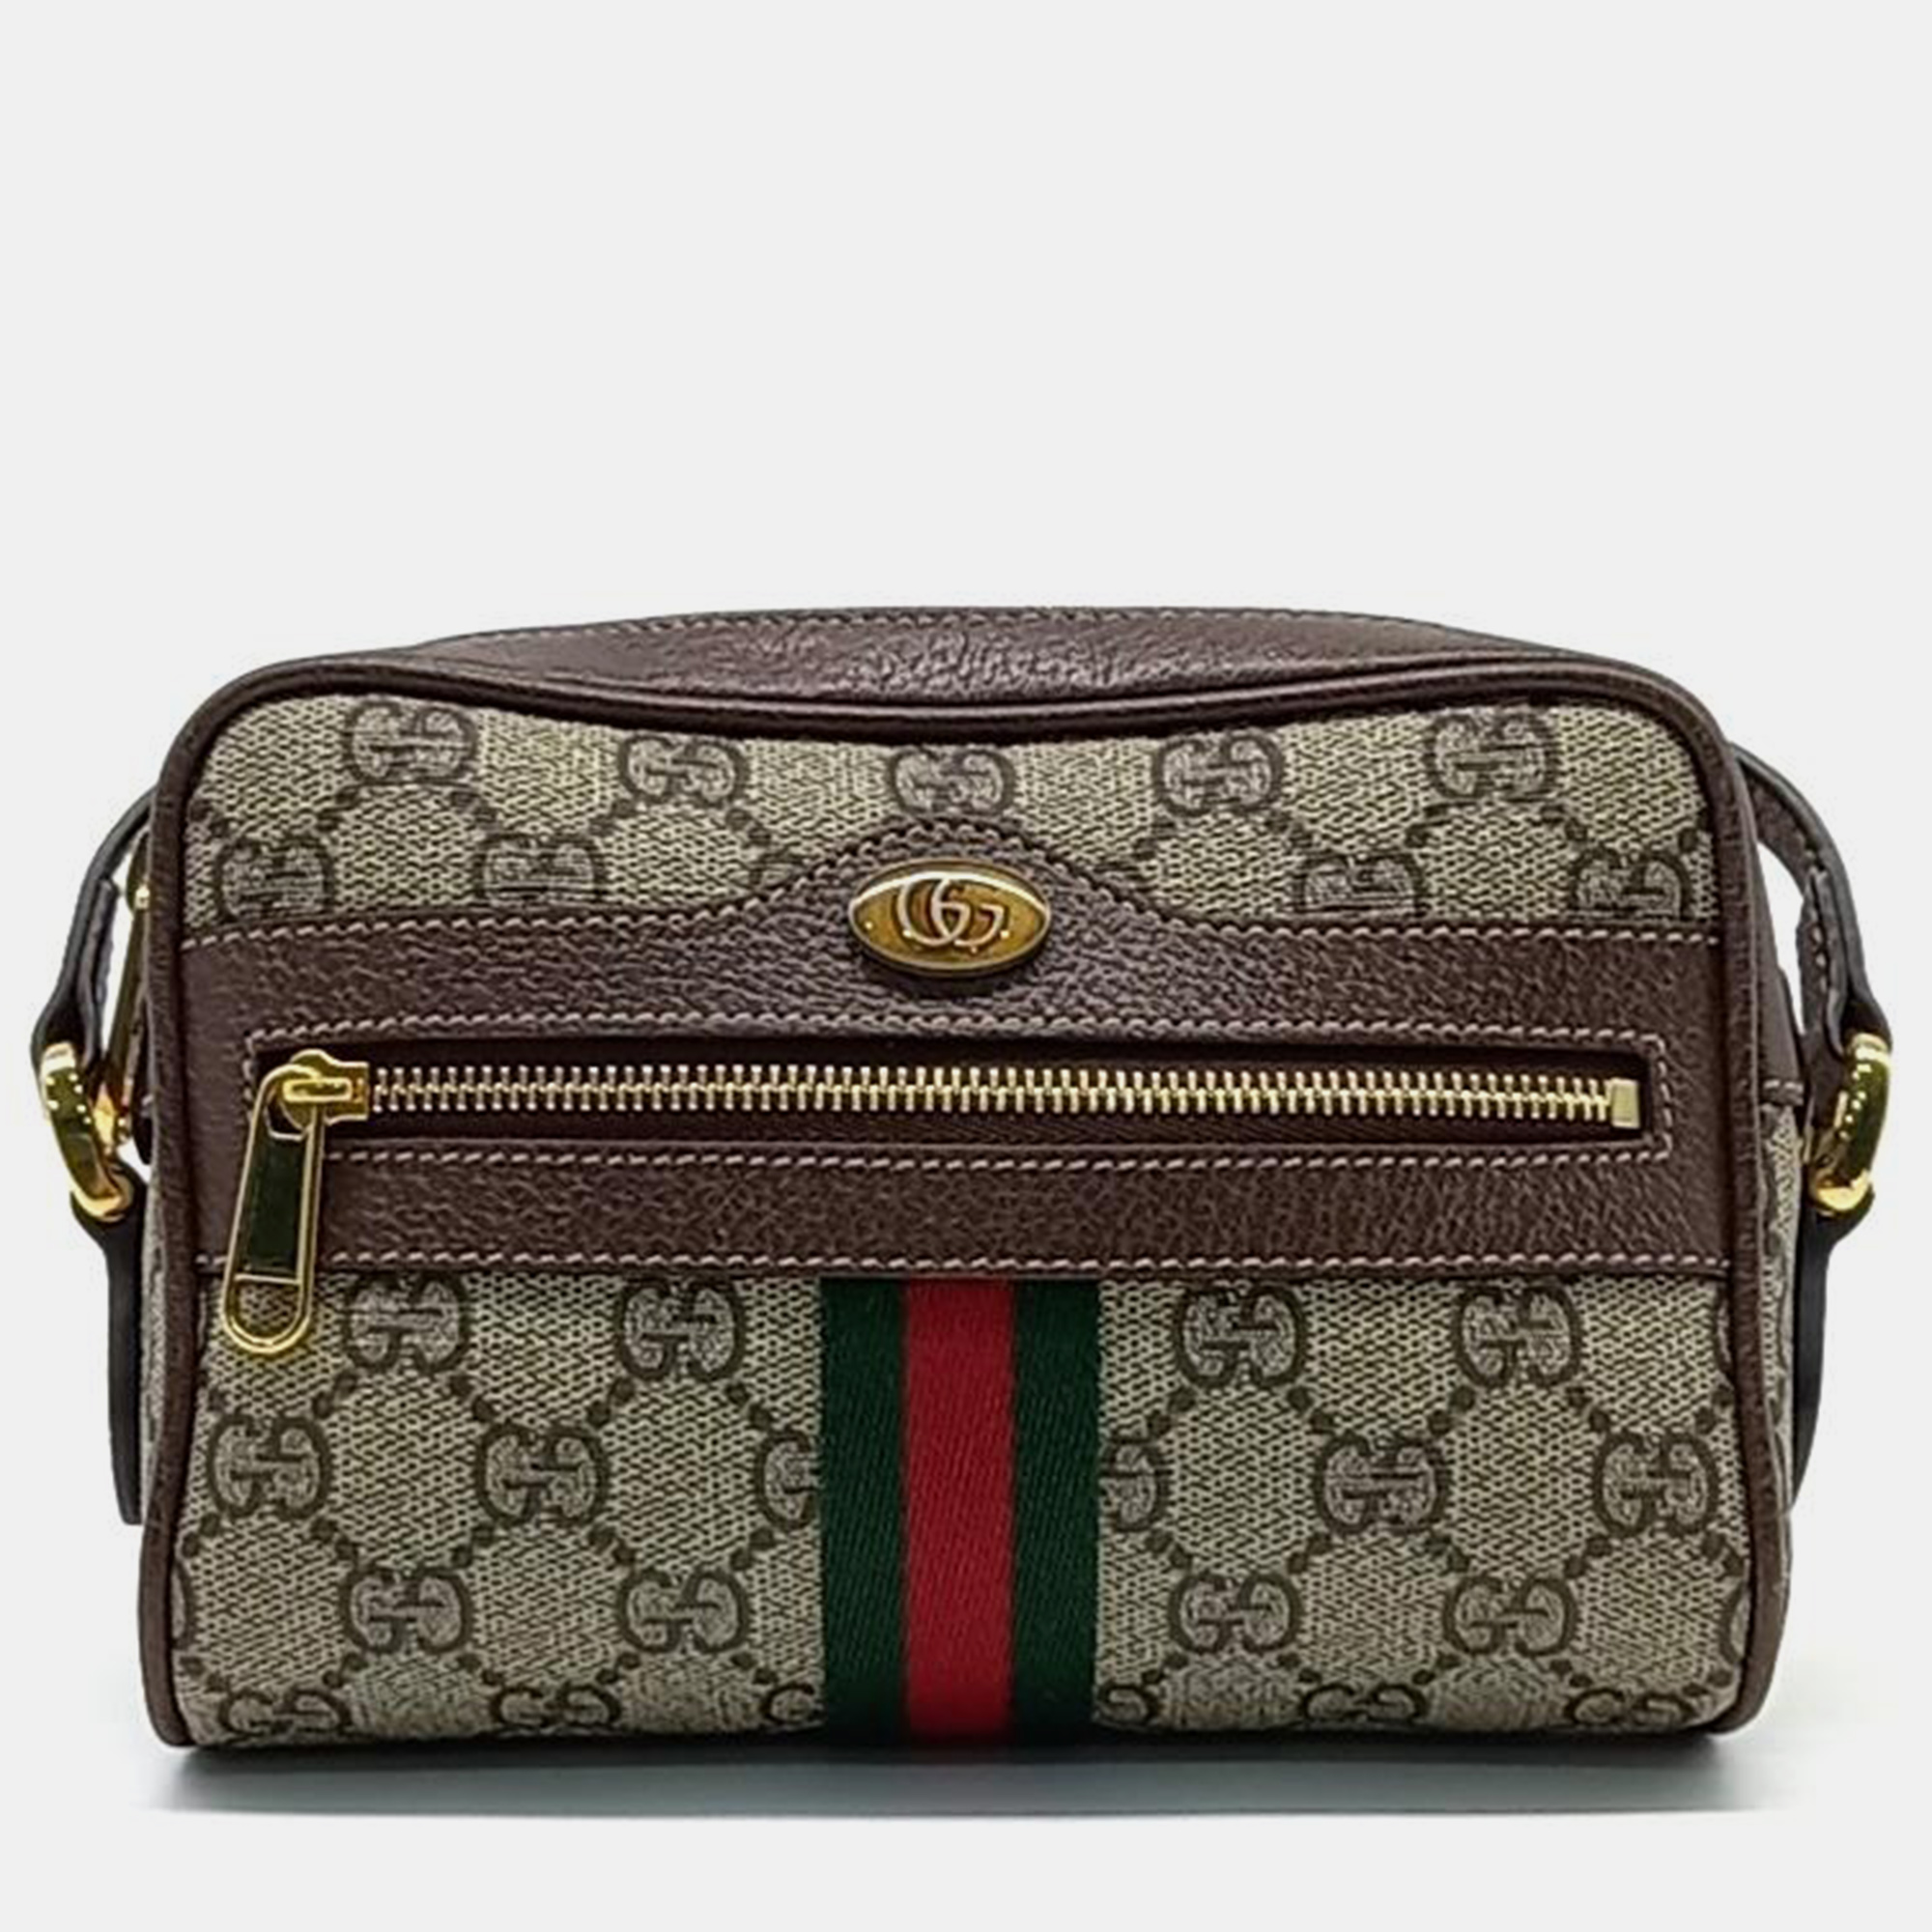 This elegant Gucci shoulder bag is perfect to enhance your everyday style. It is carefully sewn and finished to be a wonderful investment in your closet.